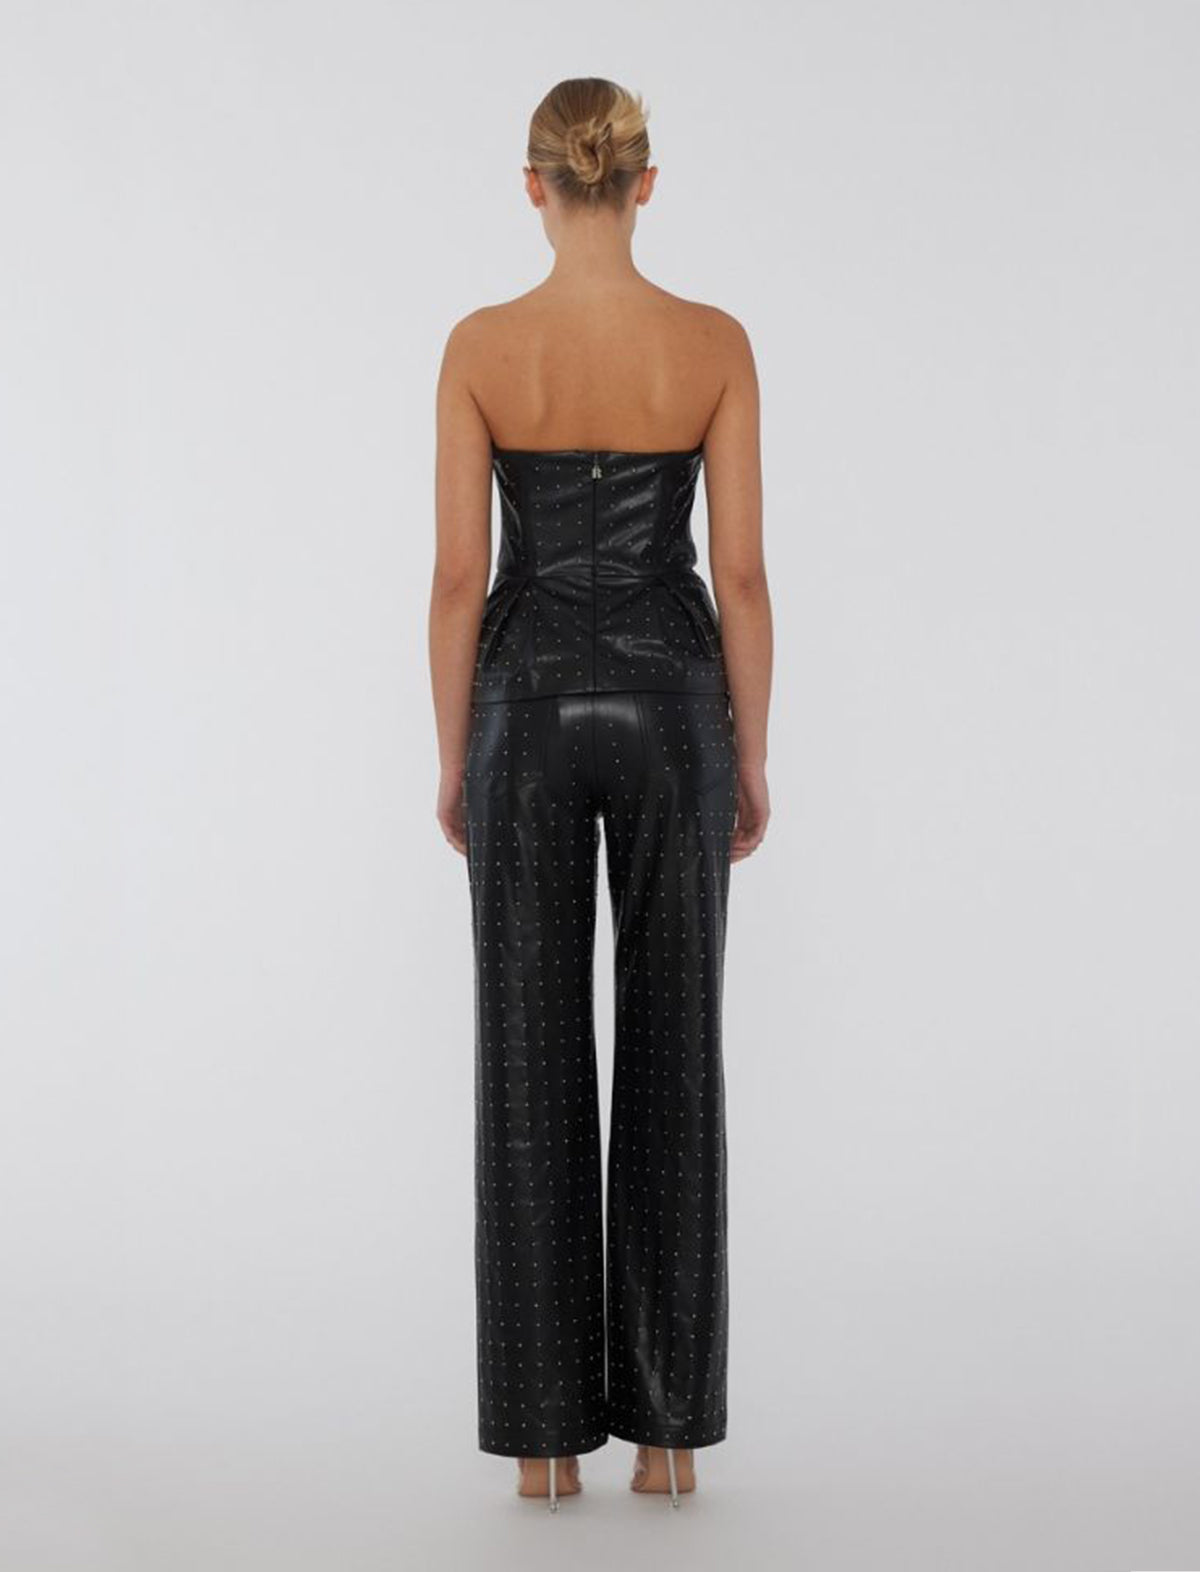 ROTATE Birger Christensen Studded Faux Leather Straight Pants in Black